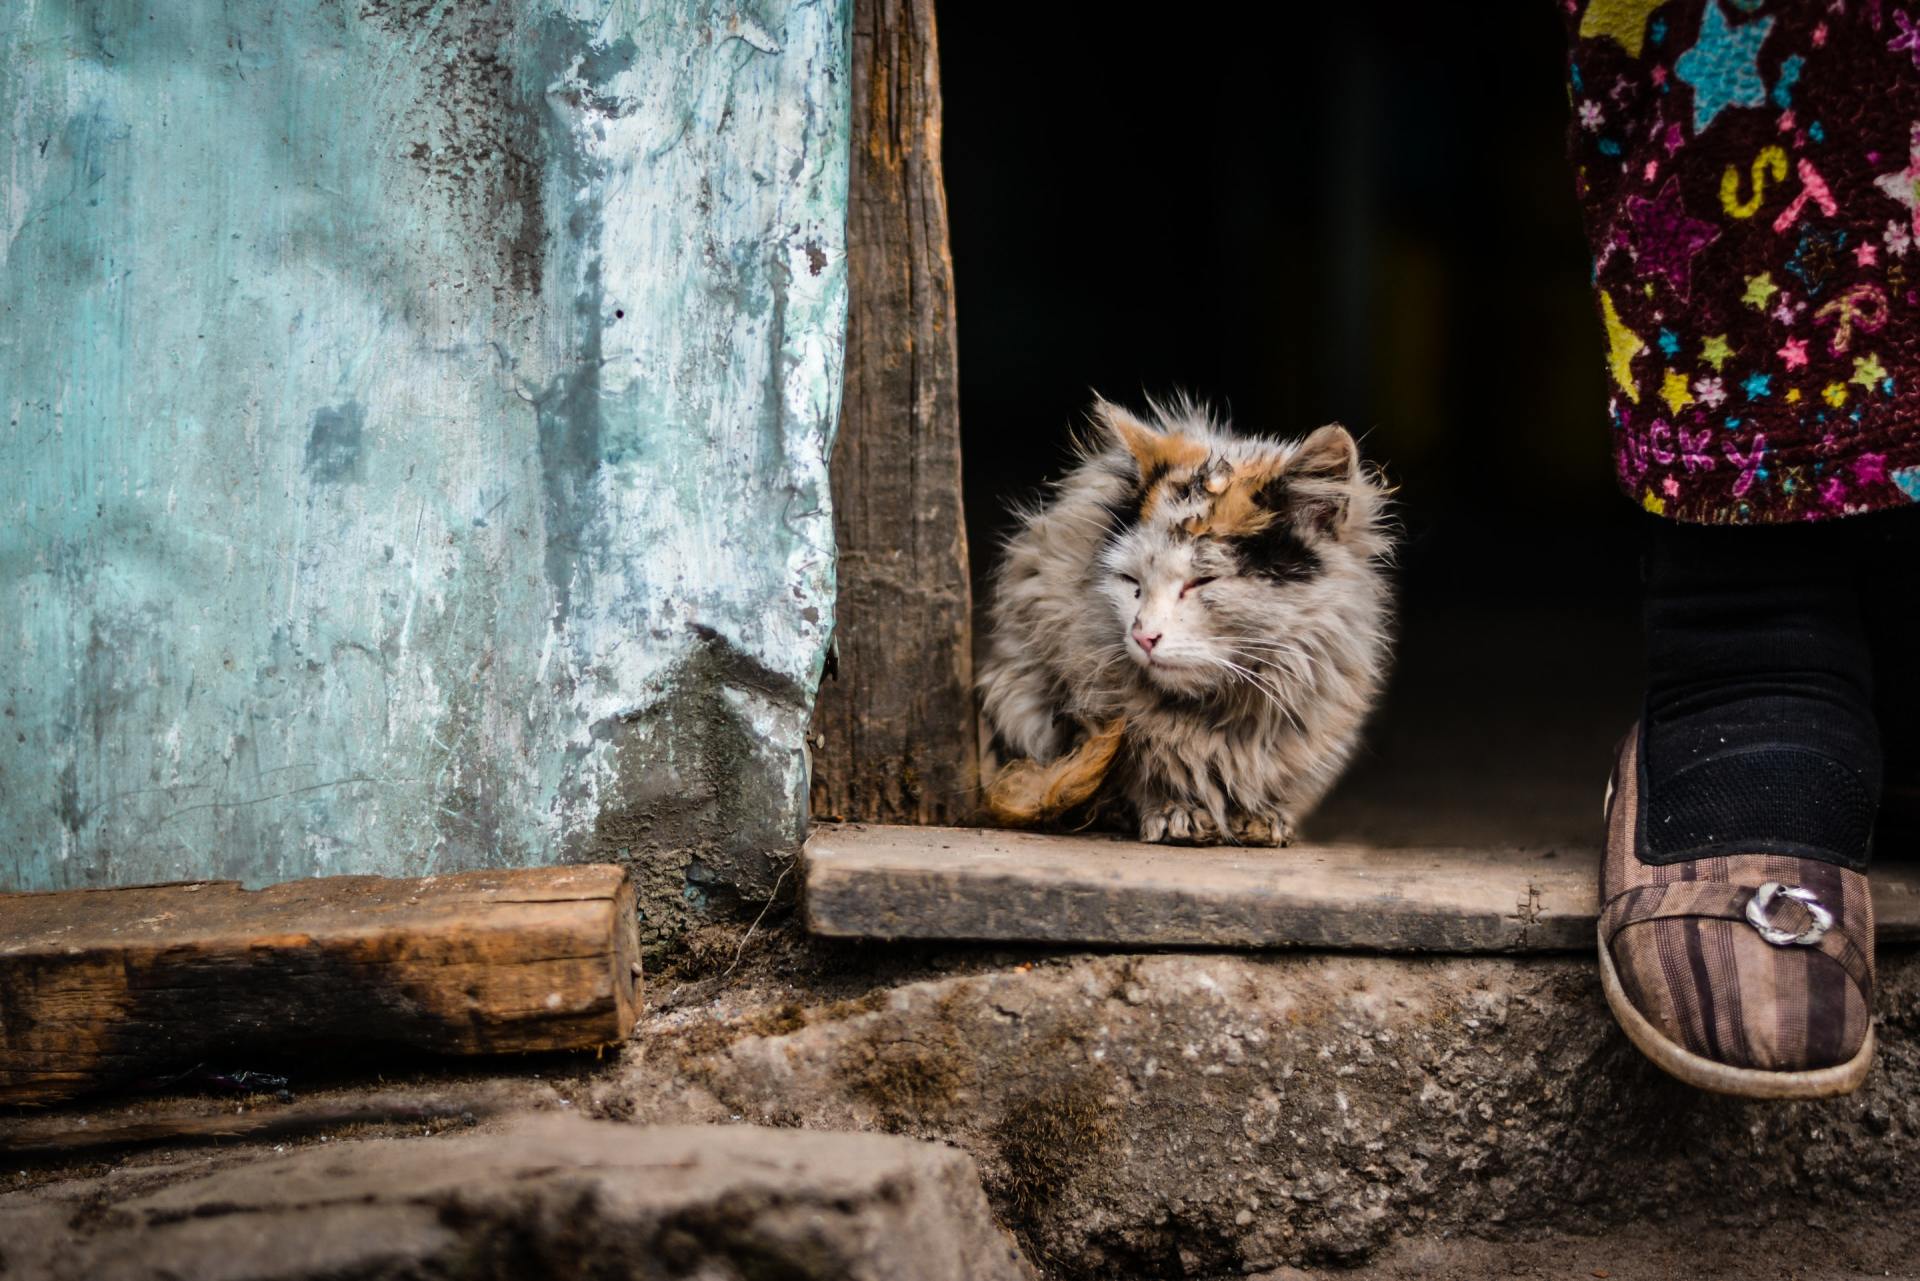 An old cat sits on a step with a matted coat